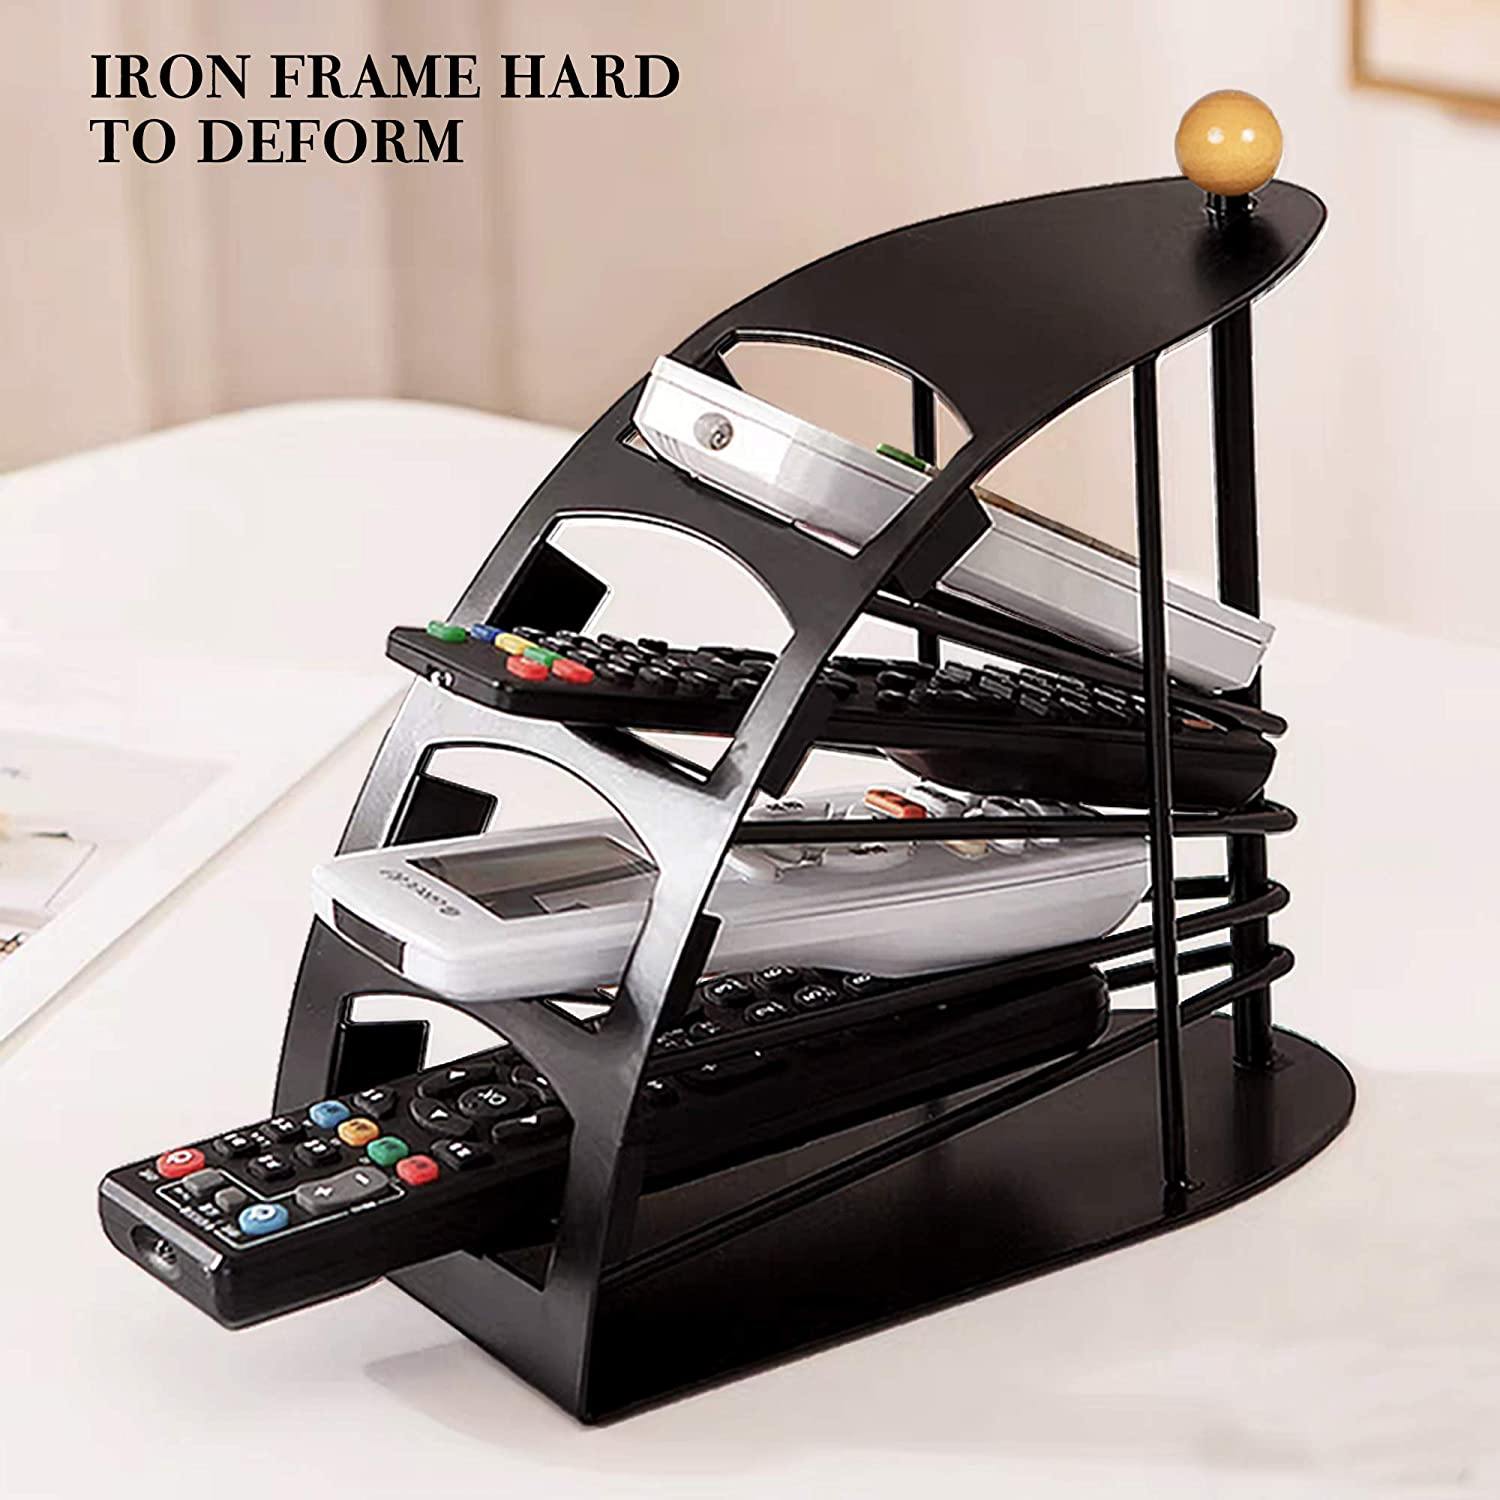 Multi Remote Control Organizer Metal TV Remote Control Holder with 4 Compartments, Space Saving Black Remote Control Tidy Remote Caddy - Bosonshop